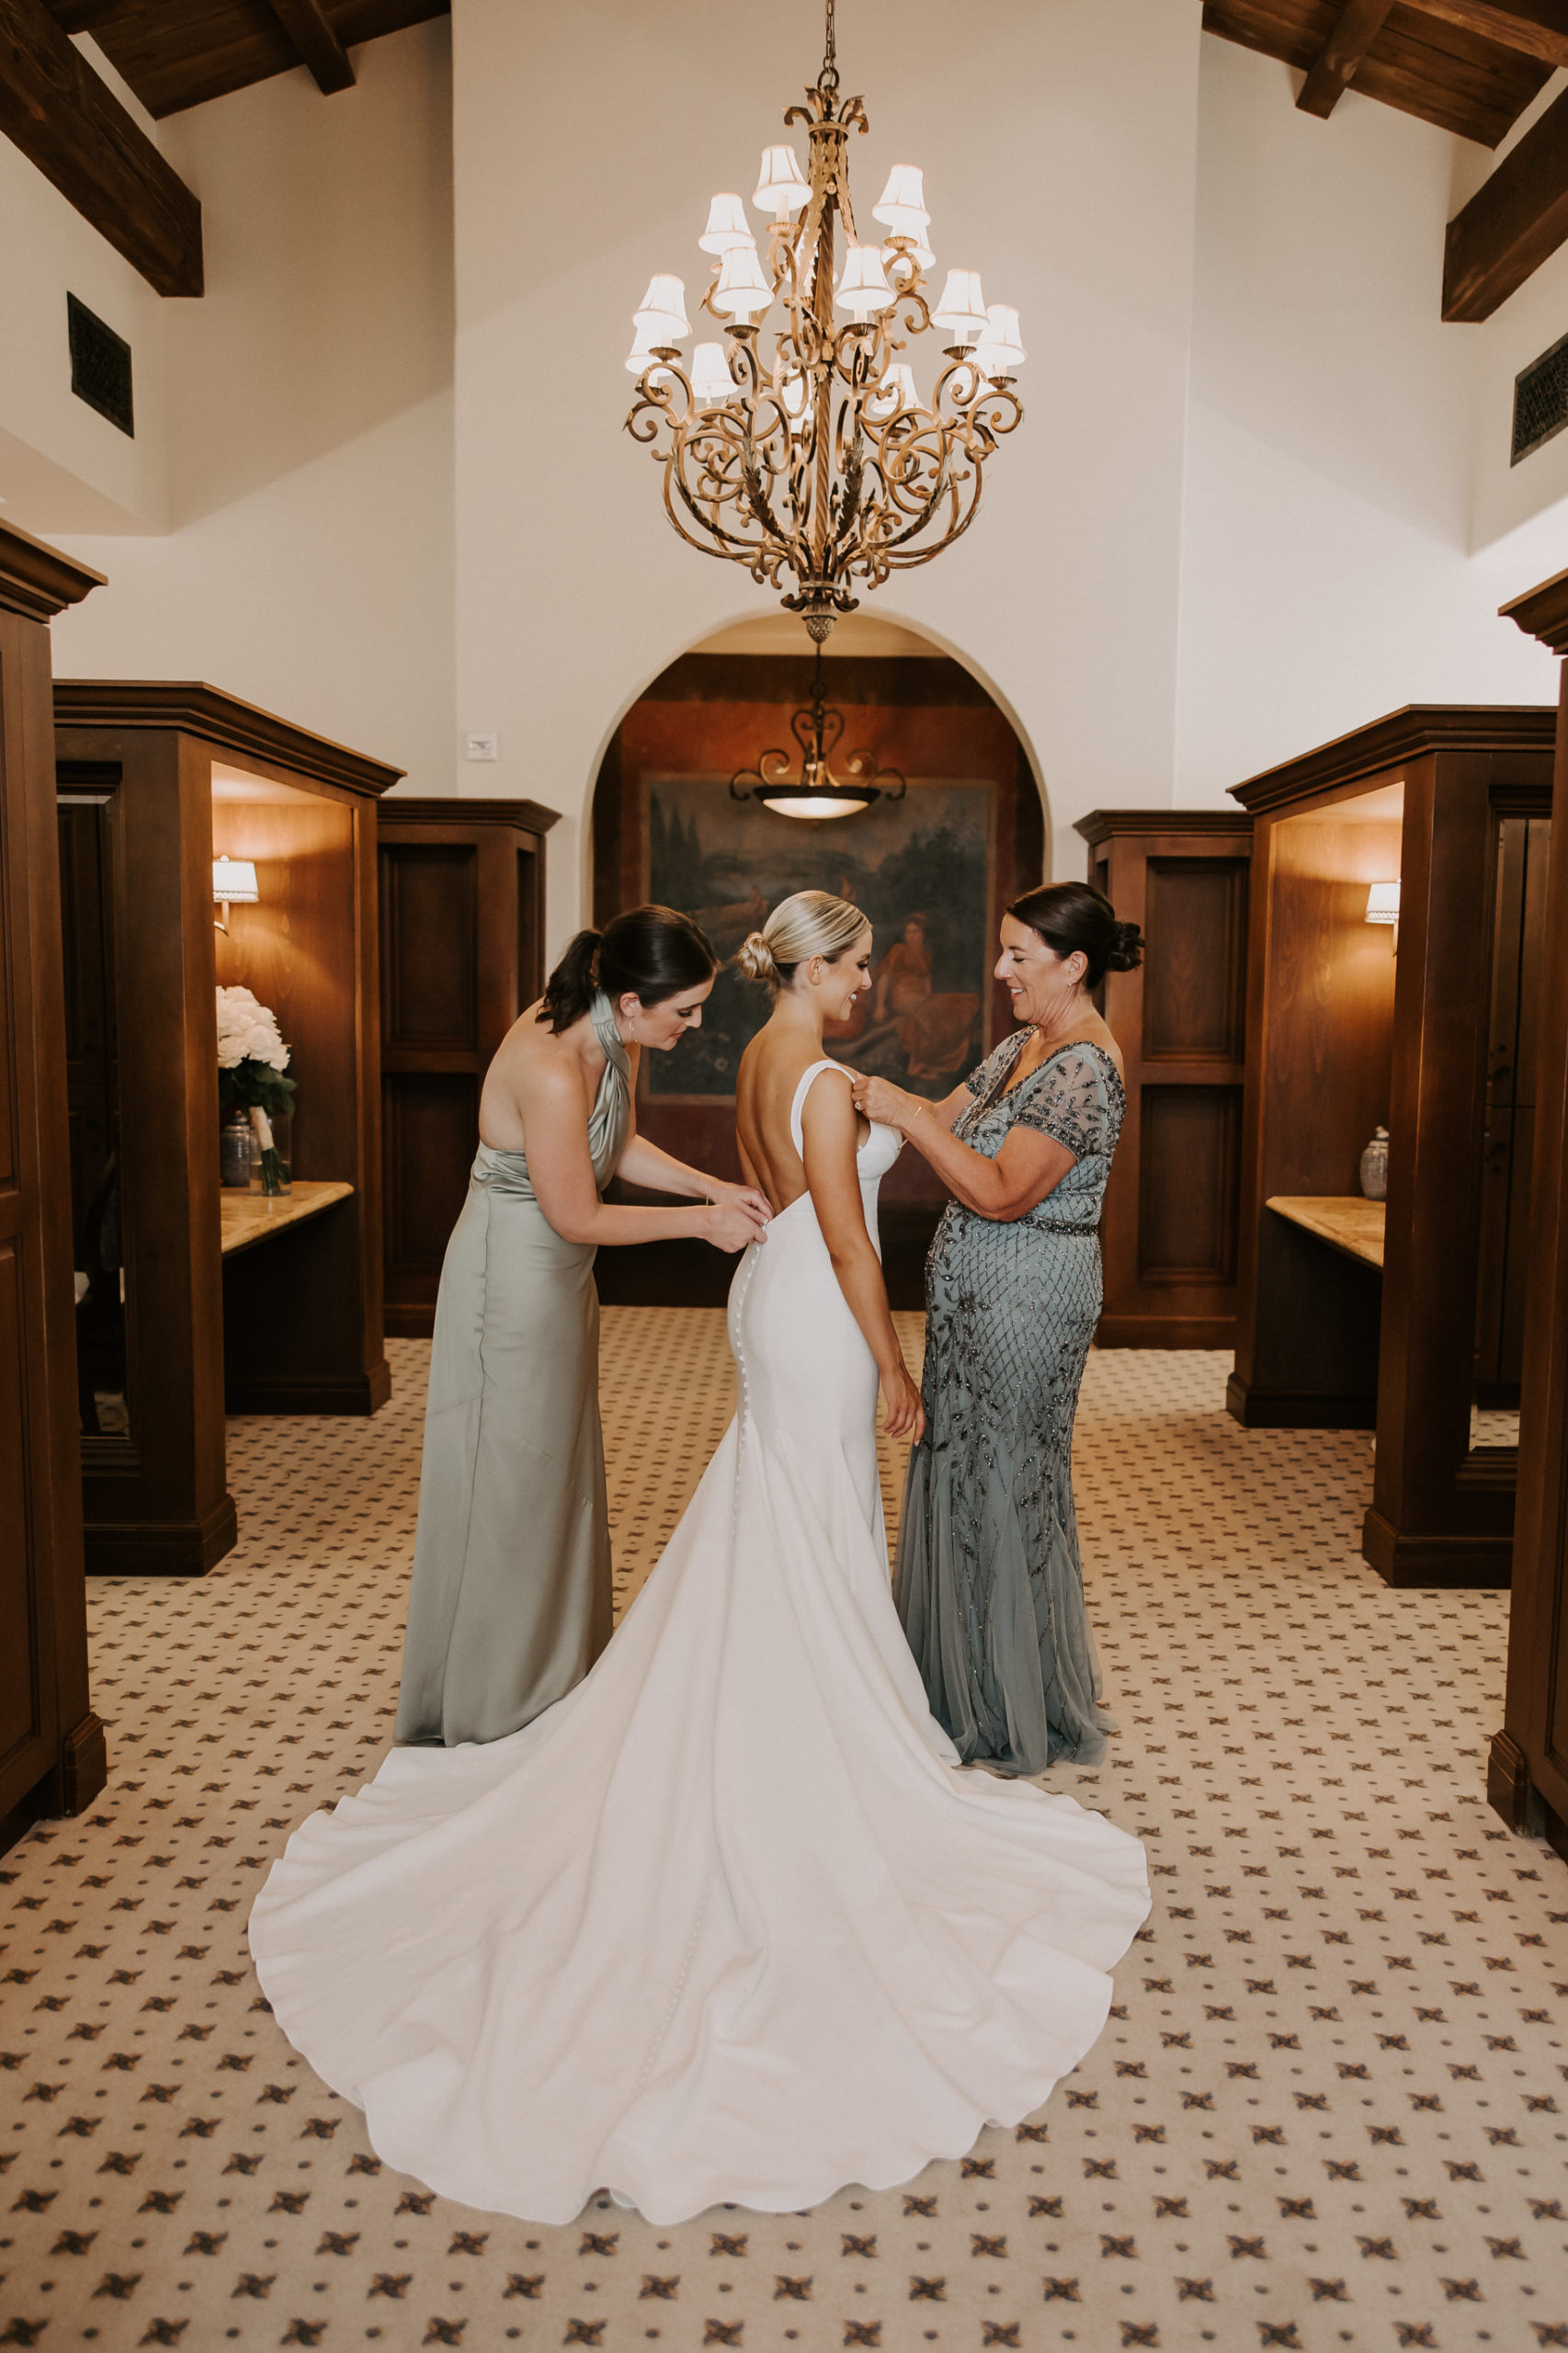 The style of the couple for their elegant and timeless wedding was inspired by classic looks that would stand the tests of time.
Sydney knew that she wanted a timeless and clean look to her dress. She chose a more simple style in general, so this dress was simply perfect and elegant.